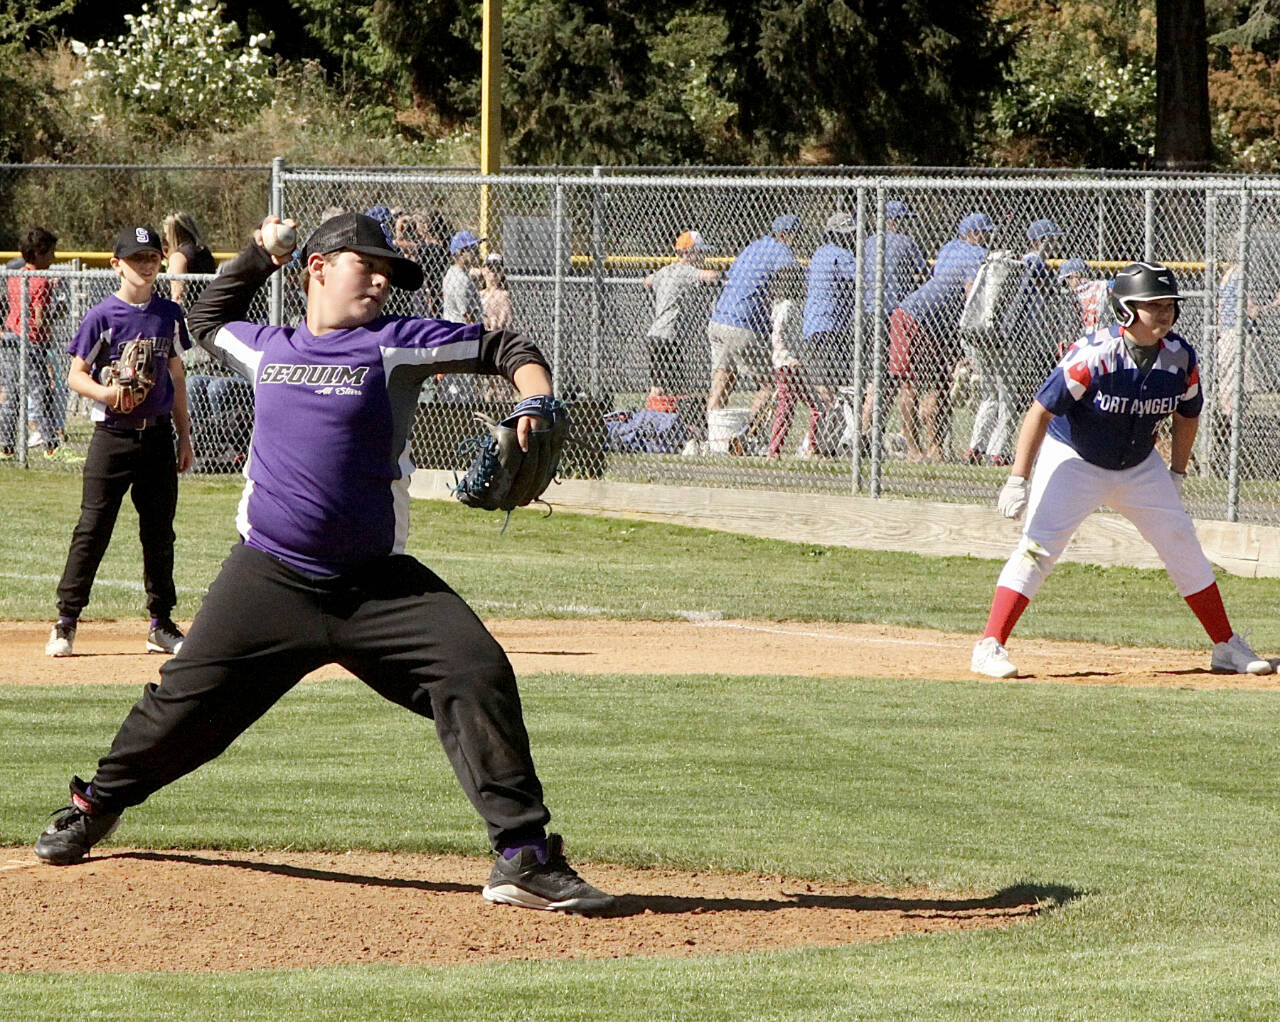 Van Johnson of the Sequim Adagio Scramming’ Beans 12-year-old team opens the 24th annual Dick Brown Memorial Baseball Tournament on Saturday against Port Angeles at Lincoln Park. (Dave Logan/for Peninsula Daily News)